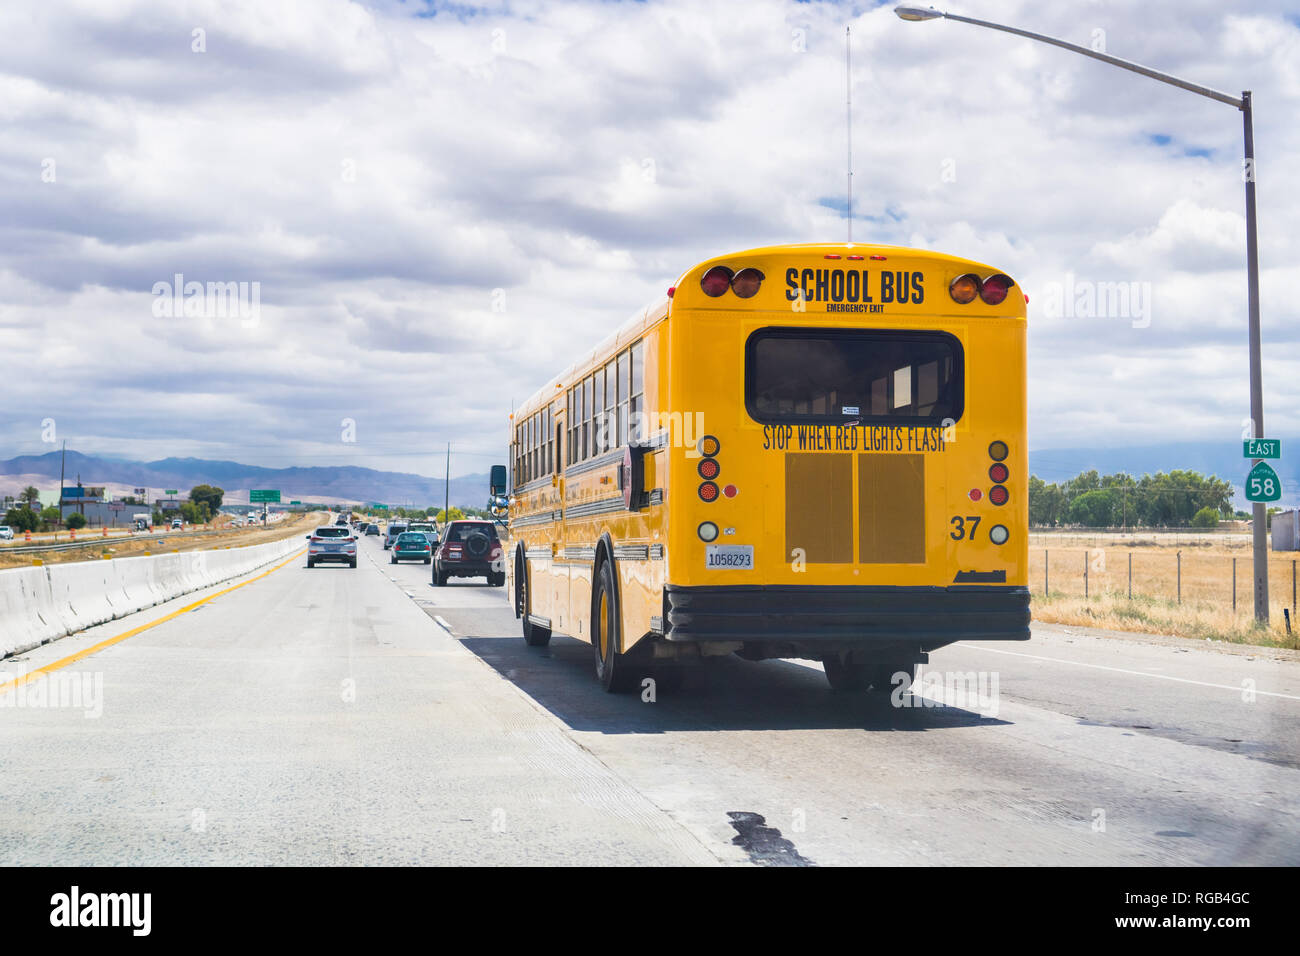 May 25, 2018 Bakersfield / CA / USA - School Bus travelling on the highway Stock Photo